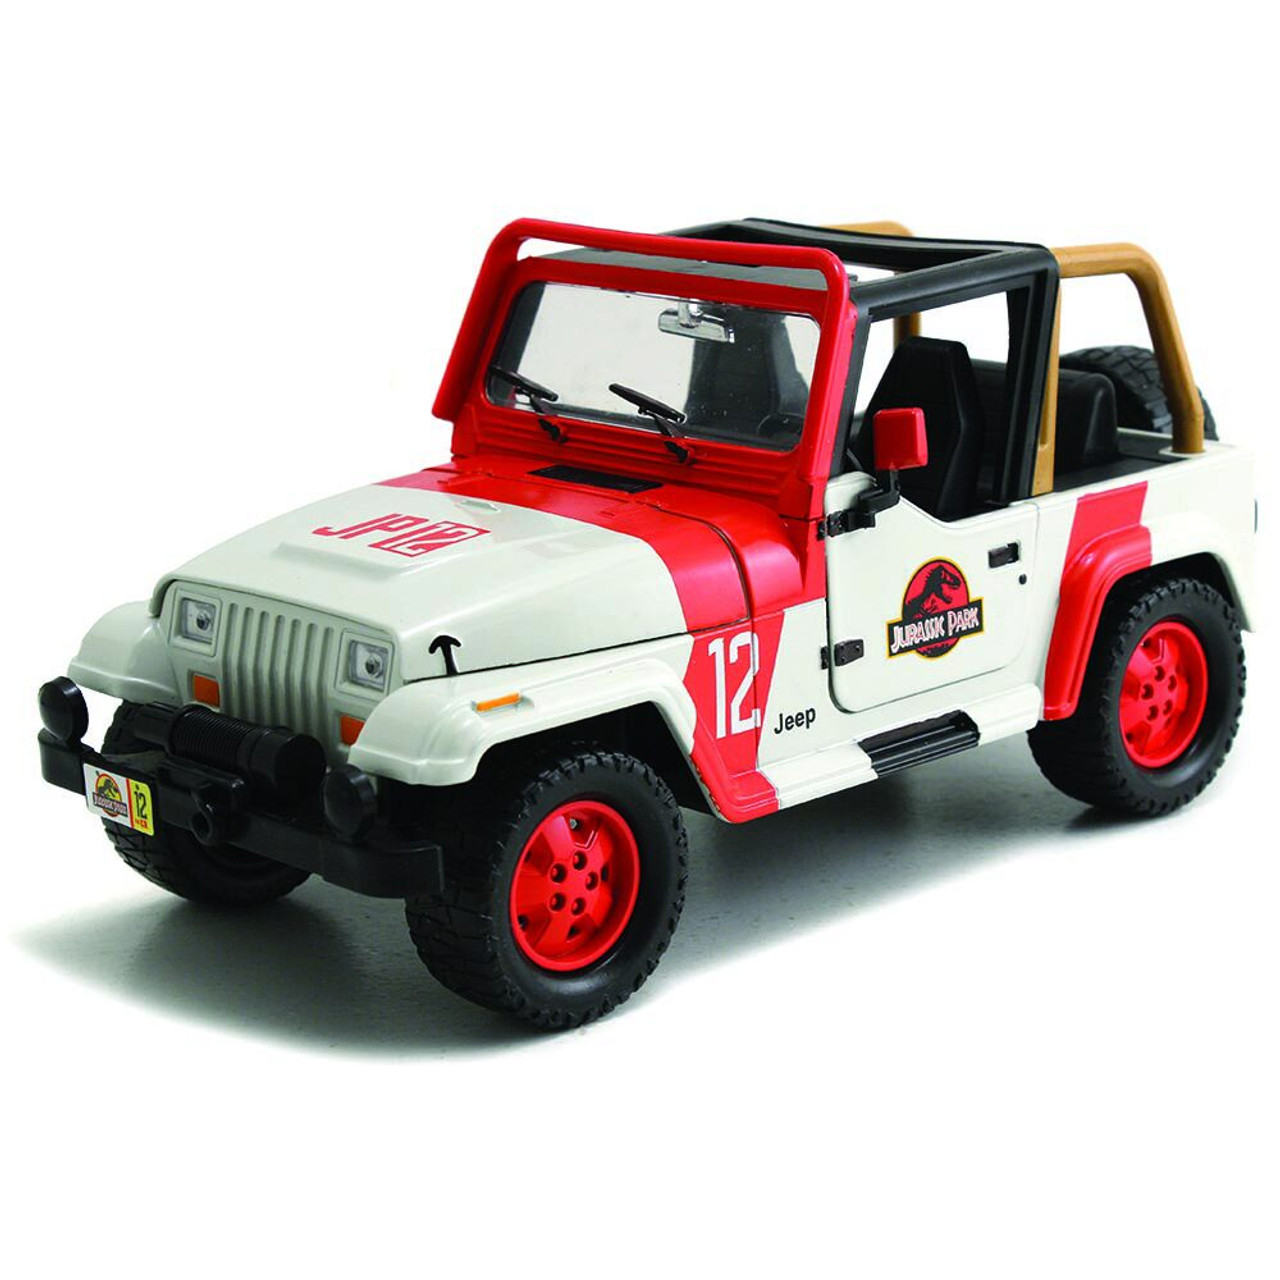 Jurassic World Jeep Wrangler 1:24 Scale Diecast Model by Jada Toys |  Fairfield Collectibles - The #1 Source For High Quality Diecast Scale Model  Cars